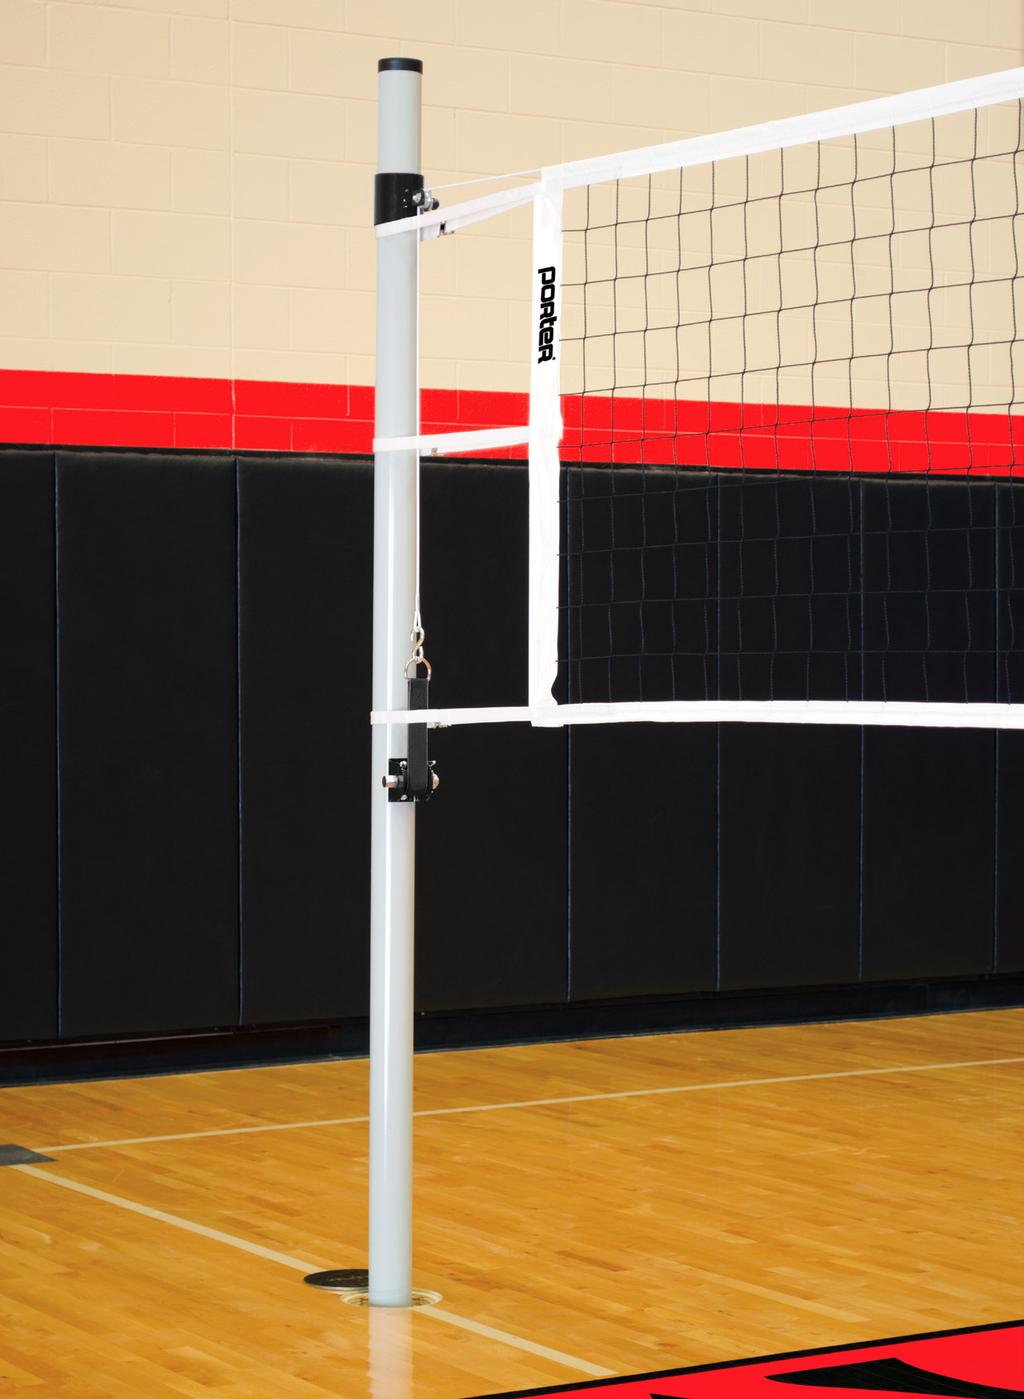 GREAT FOR P.E.CLASSES & RECREATION FACILITIES Economy Standards Sturdy, utility construction makes the Economy Standards great for practice courts, cross court setups, and elementary school use.